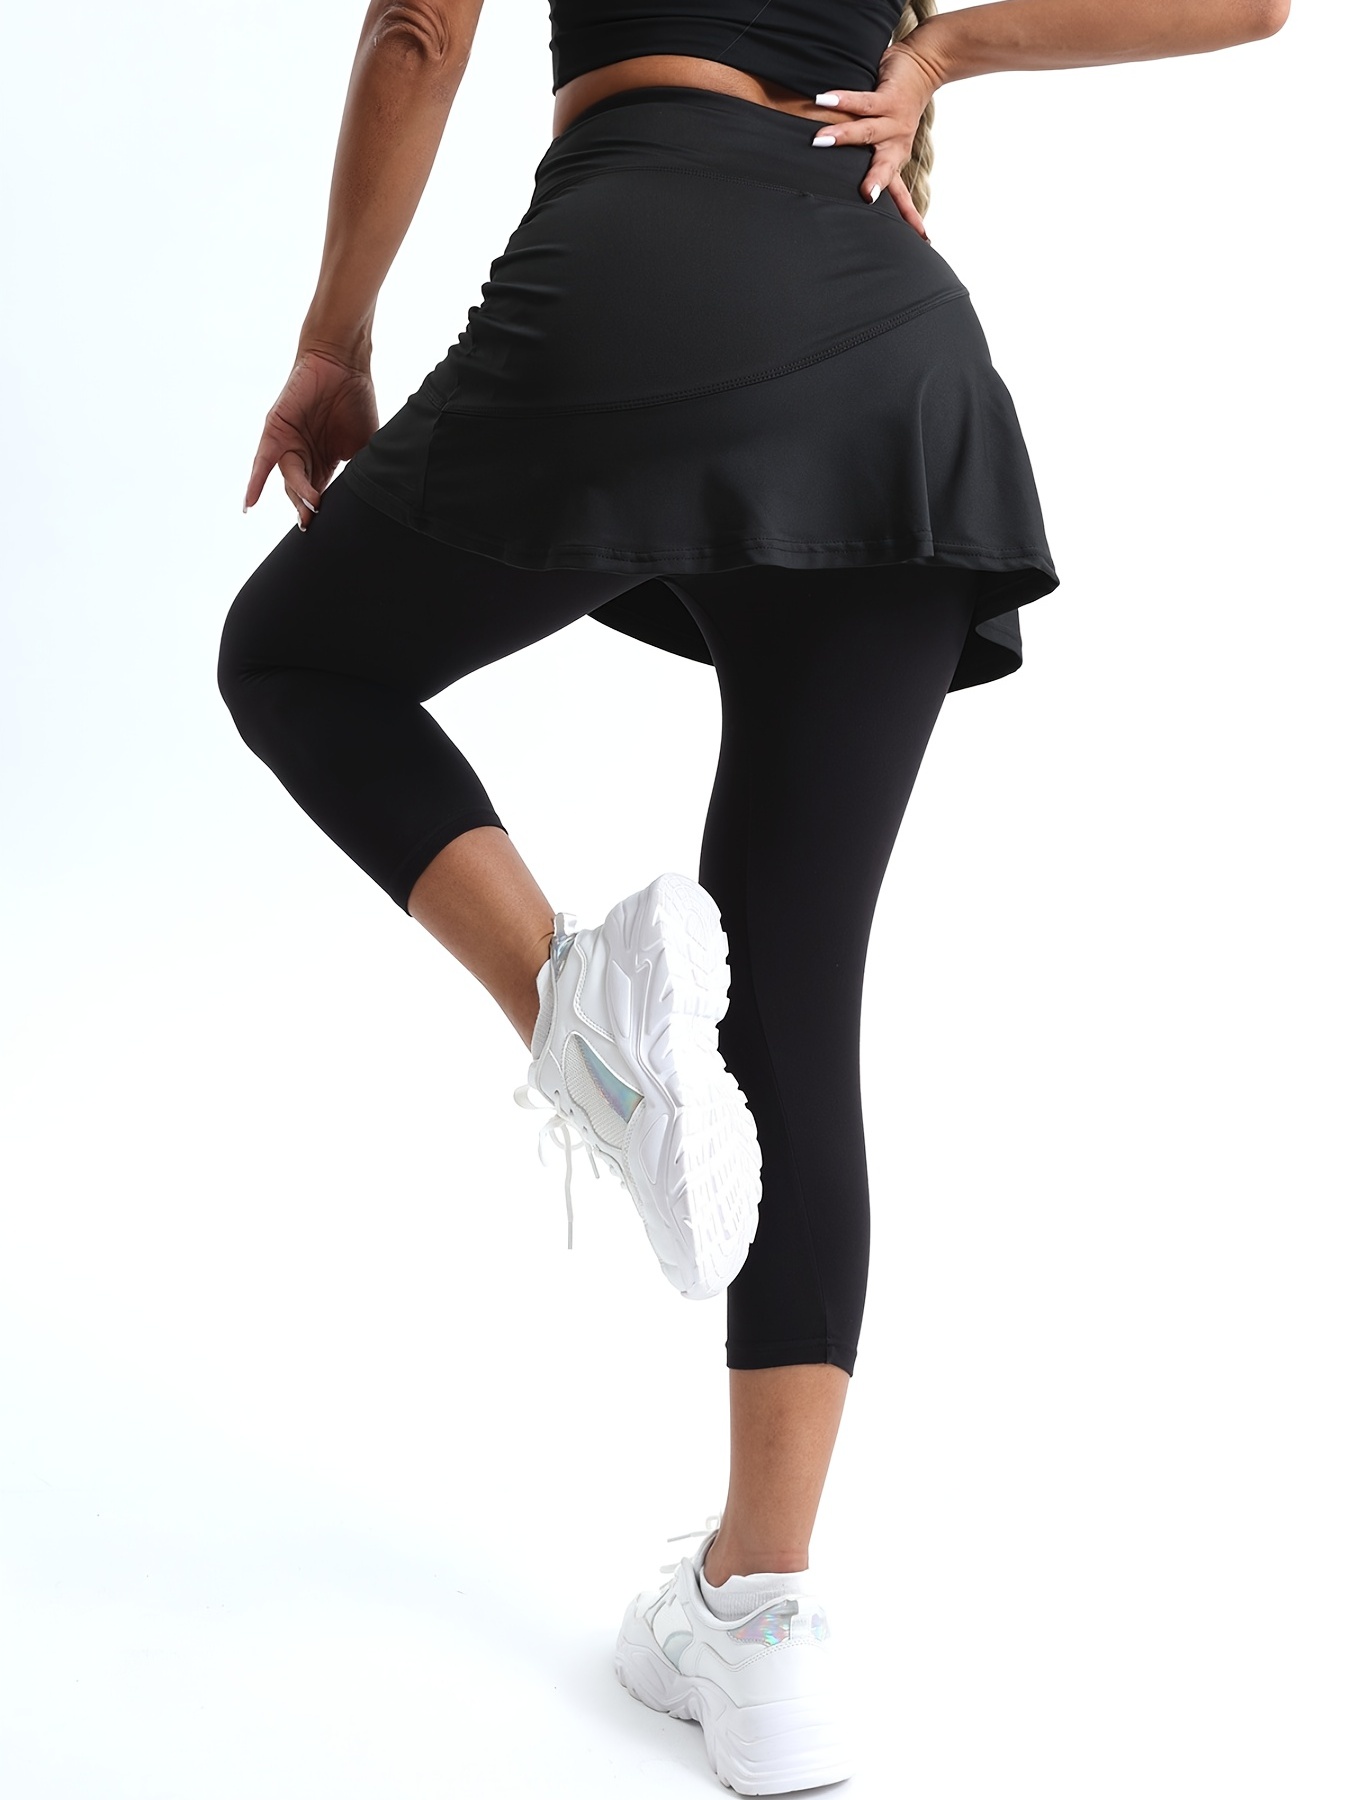 RQYYD Reduced Plus Size Skirt with Leggings for Women Tennis Golf